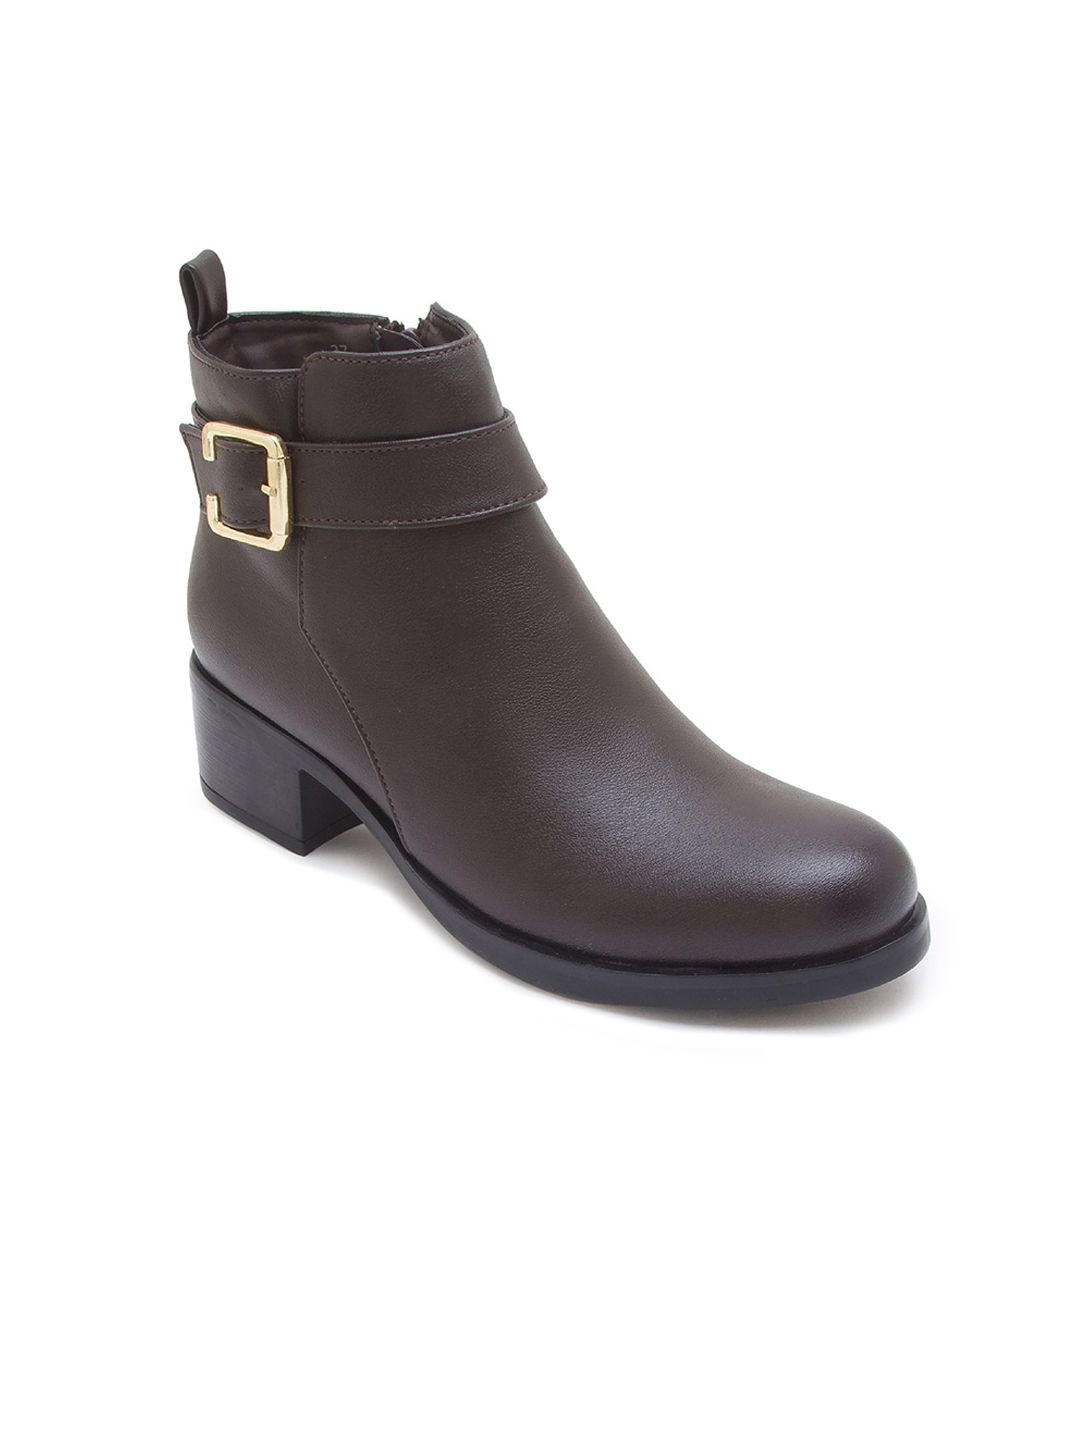 CERIZ Brown Leather Block Heeled Boots with Buckles Price in India